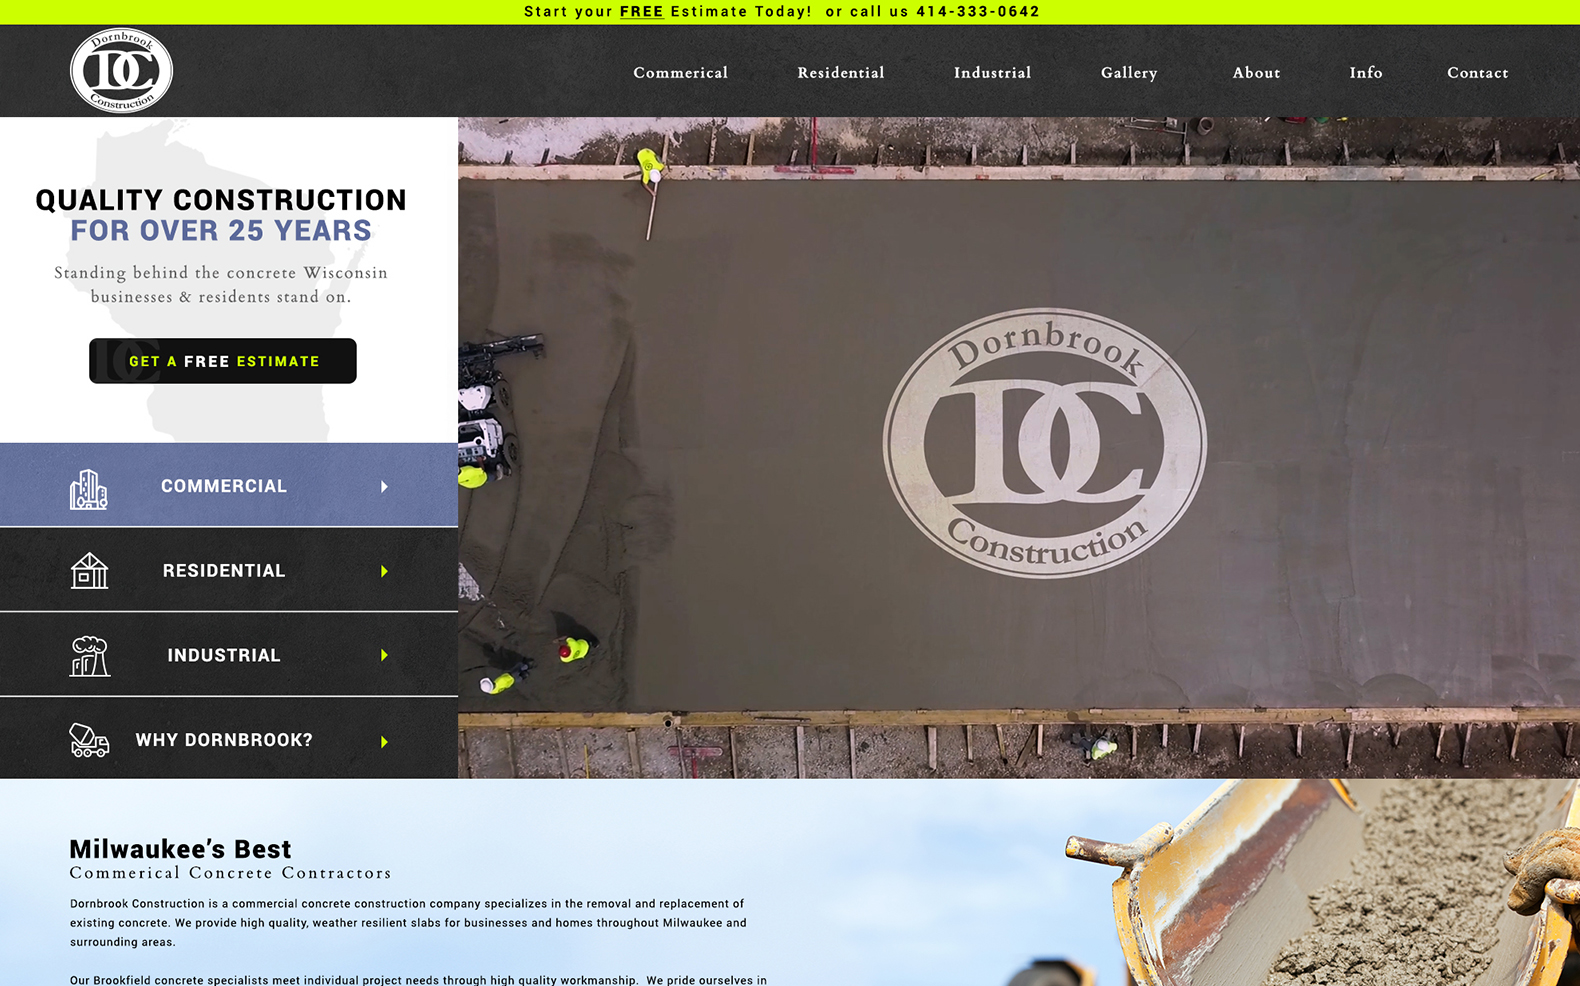 Milwaukee concrete installation company prospers with iNET’s winning web design and marketing techniques